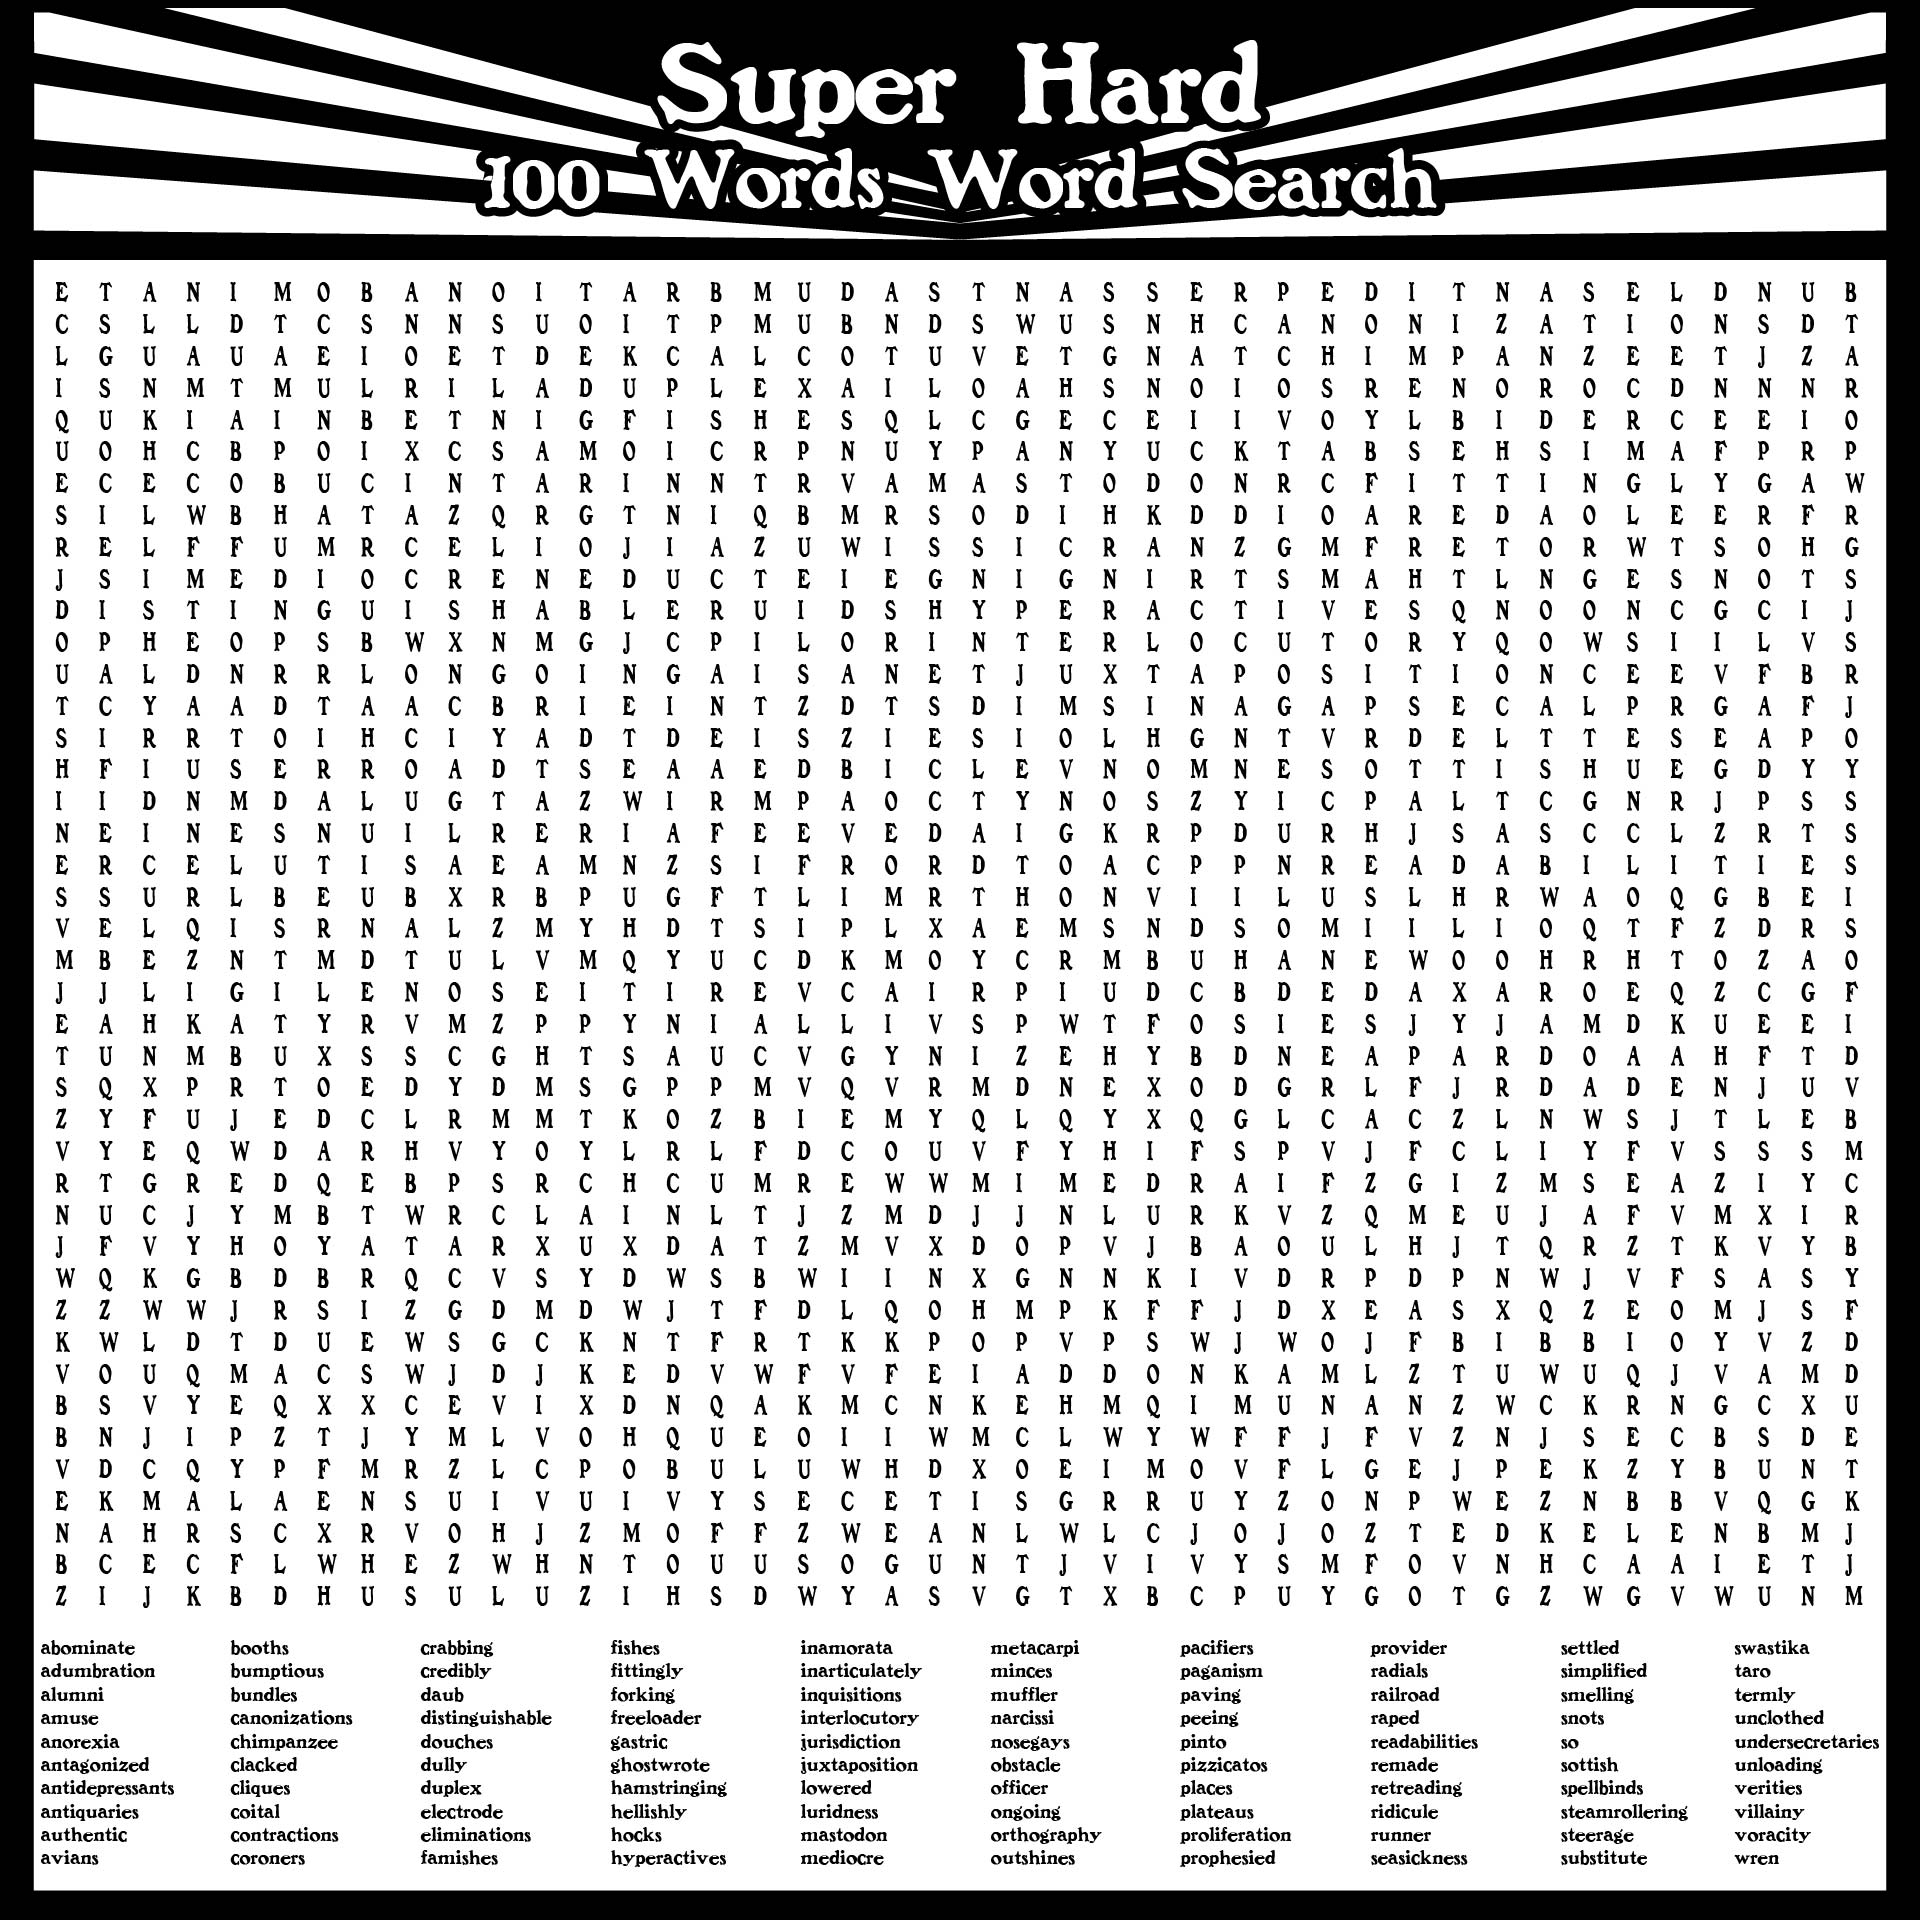 Super Hard Word Searches